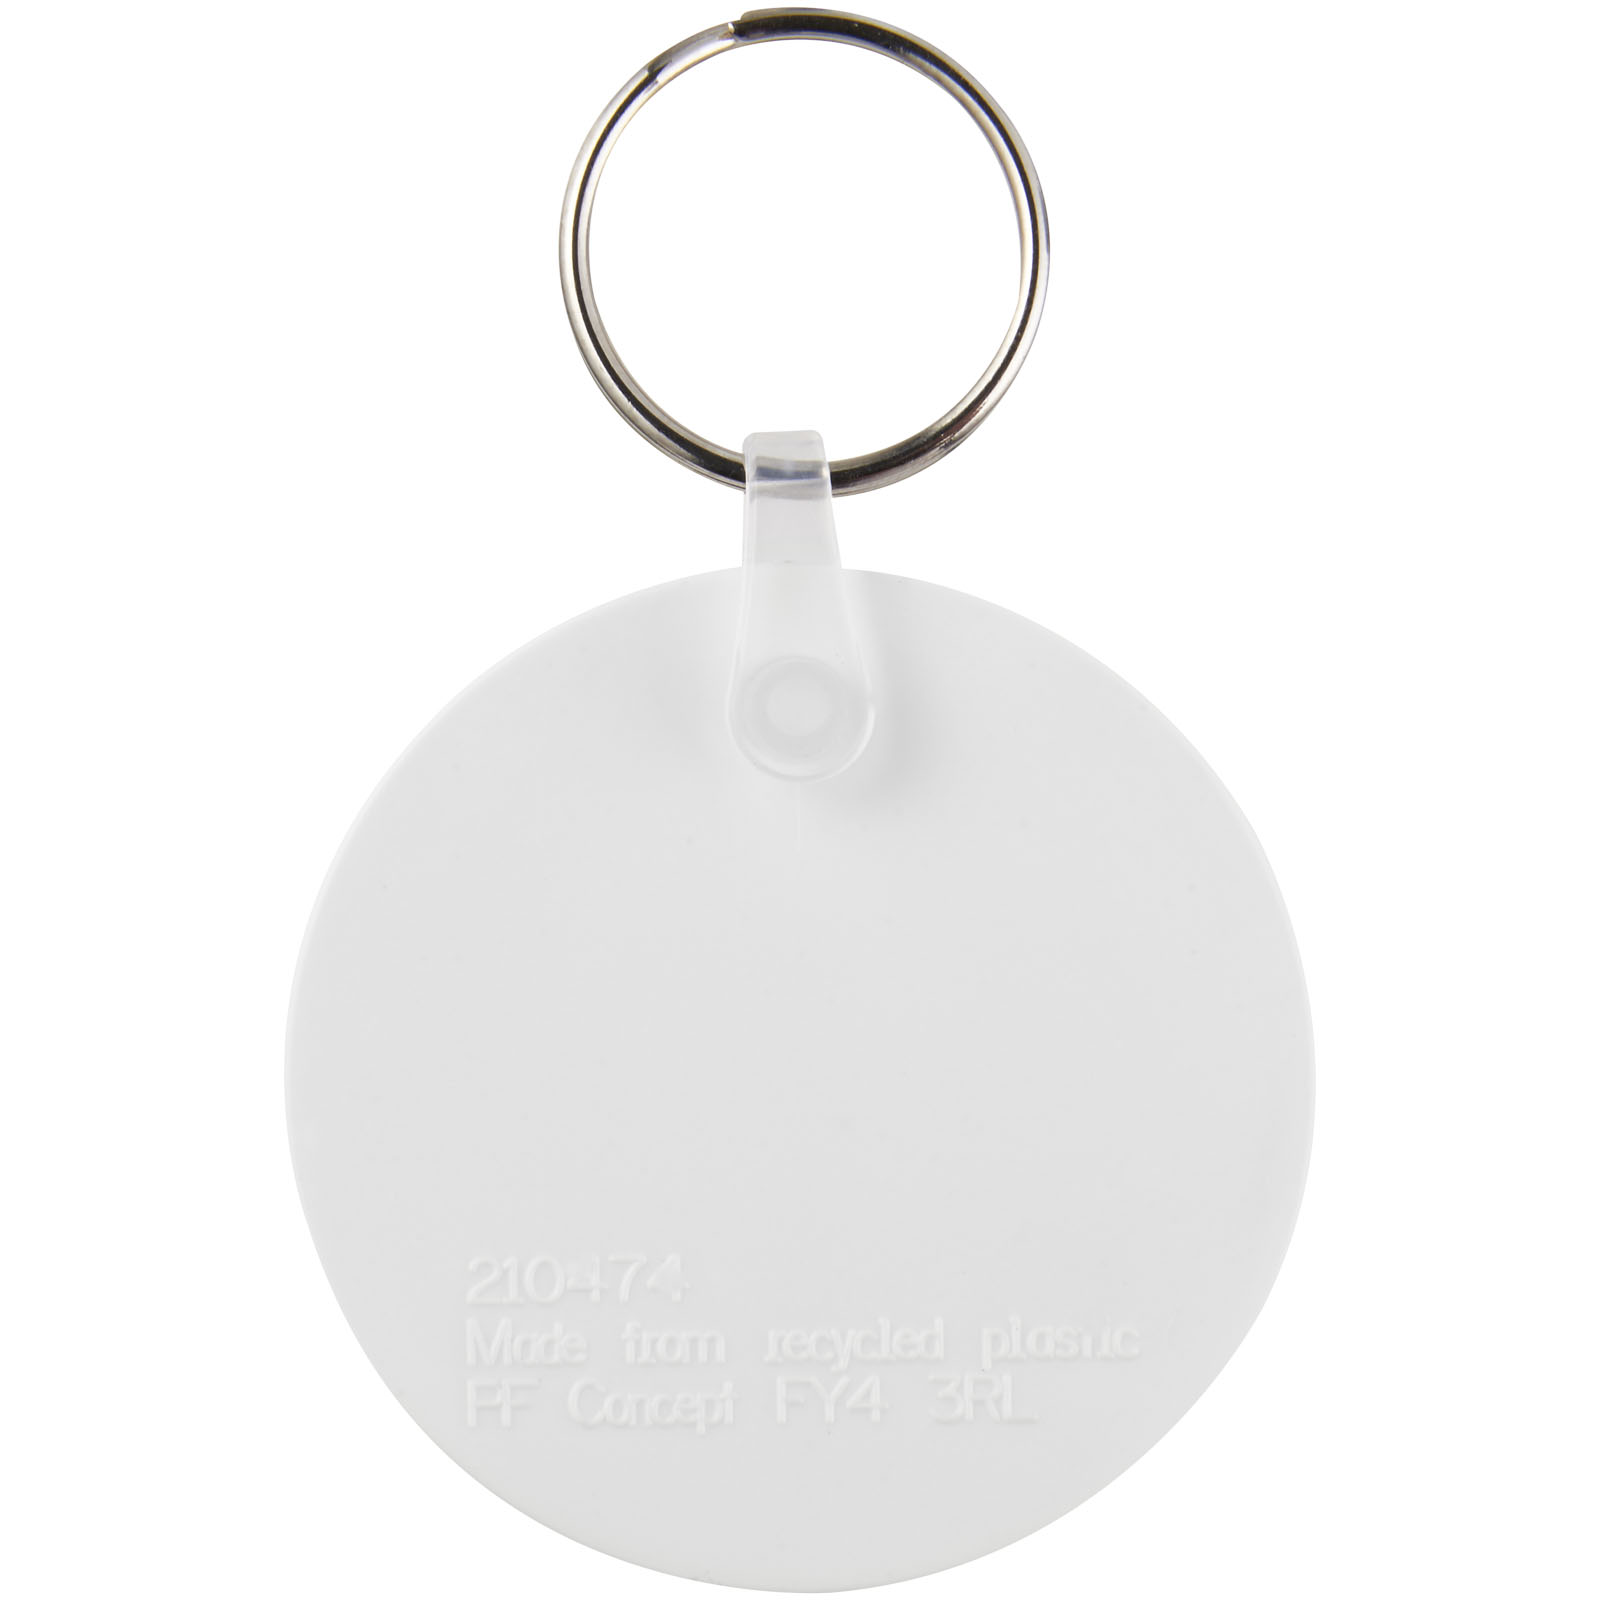 Advertising Keychains & Keyrings - Tait circle-shaped recycled keychain - 2